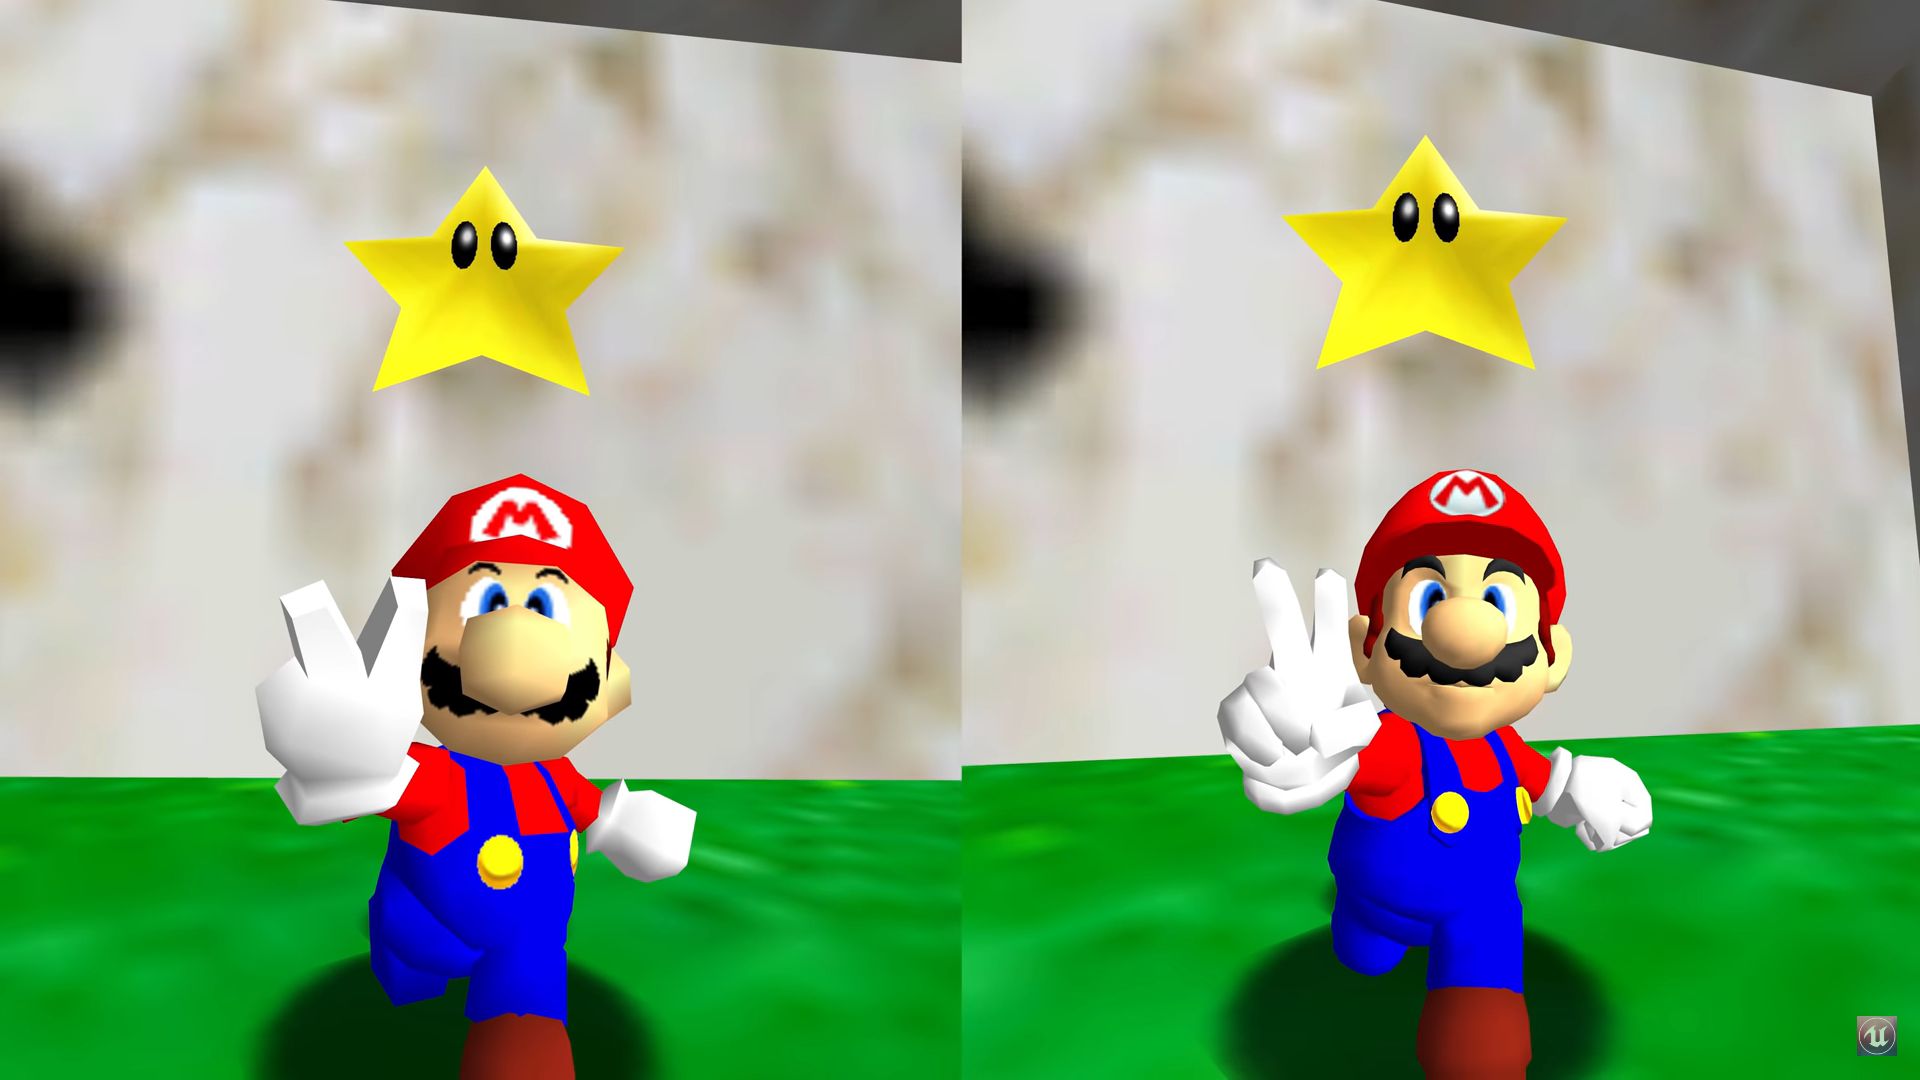 That Mario 64 Pc Port Has Mods Now Pc Gamer - super mario 64 roblox edition back up